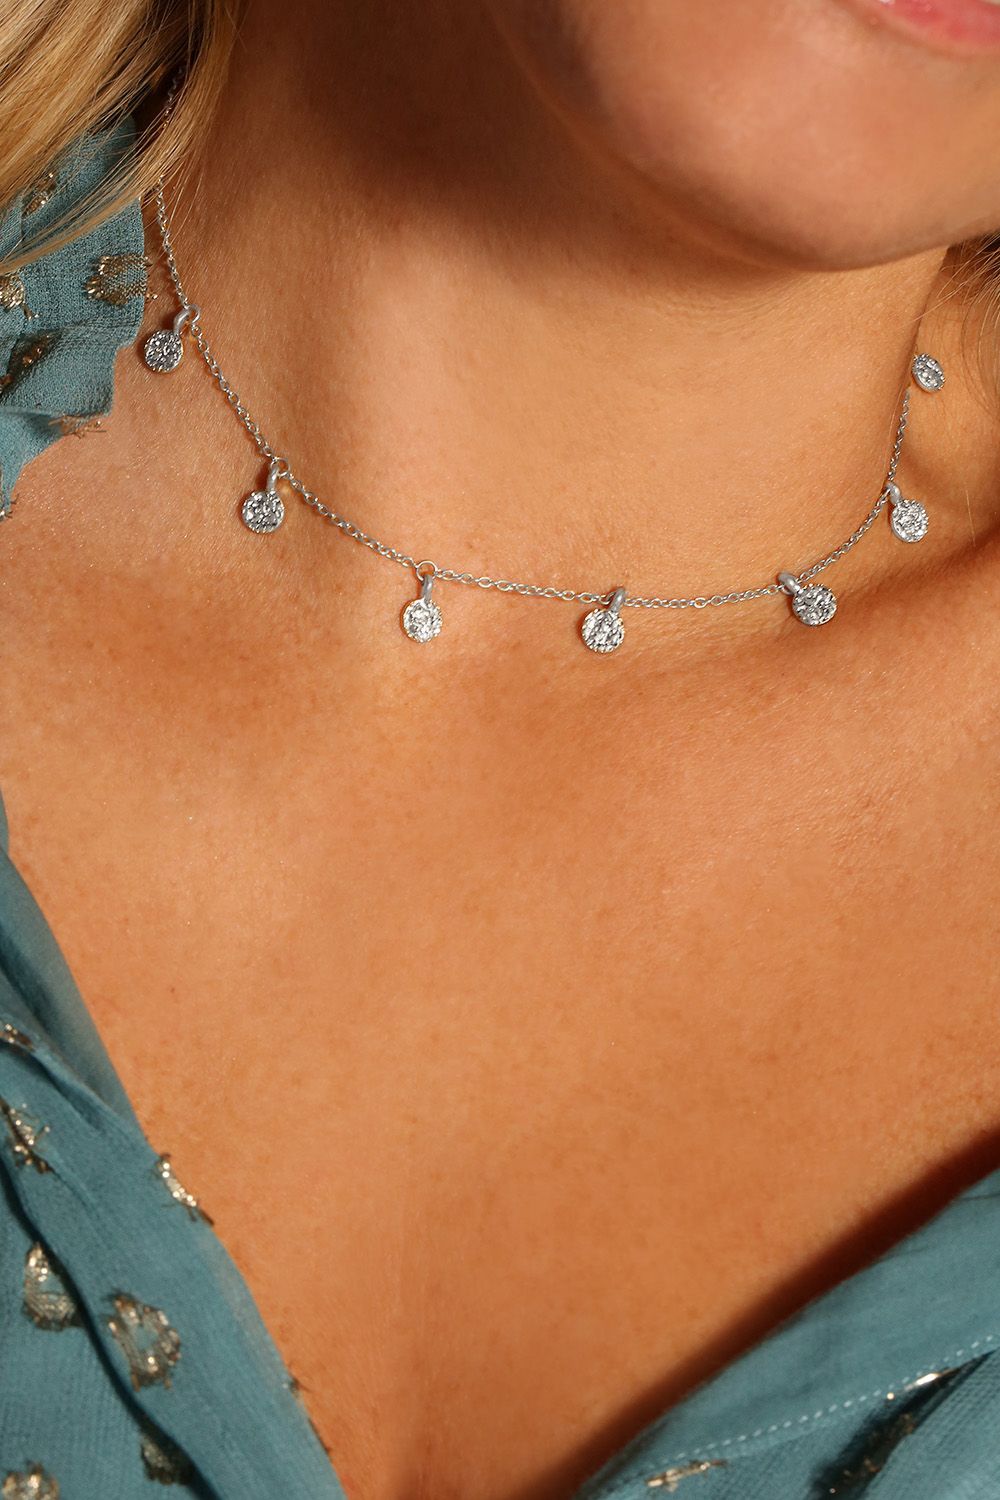 If you love your boho jewellery, this one's for you. It features a dainty silver choker with miniature coins that dance across your neck! The silver plated necklace features hammered silver detailing and looks amazing layered with another longer necklace with a low neckline outfit, or over the top of a jumper during the day! It measures 15 inches and comes with a lobster clasp fastening and a 3 inch extender. The Boho choker necklace is designed as a classic piece that you can wear with so many looks!